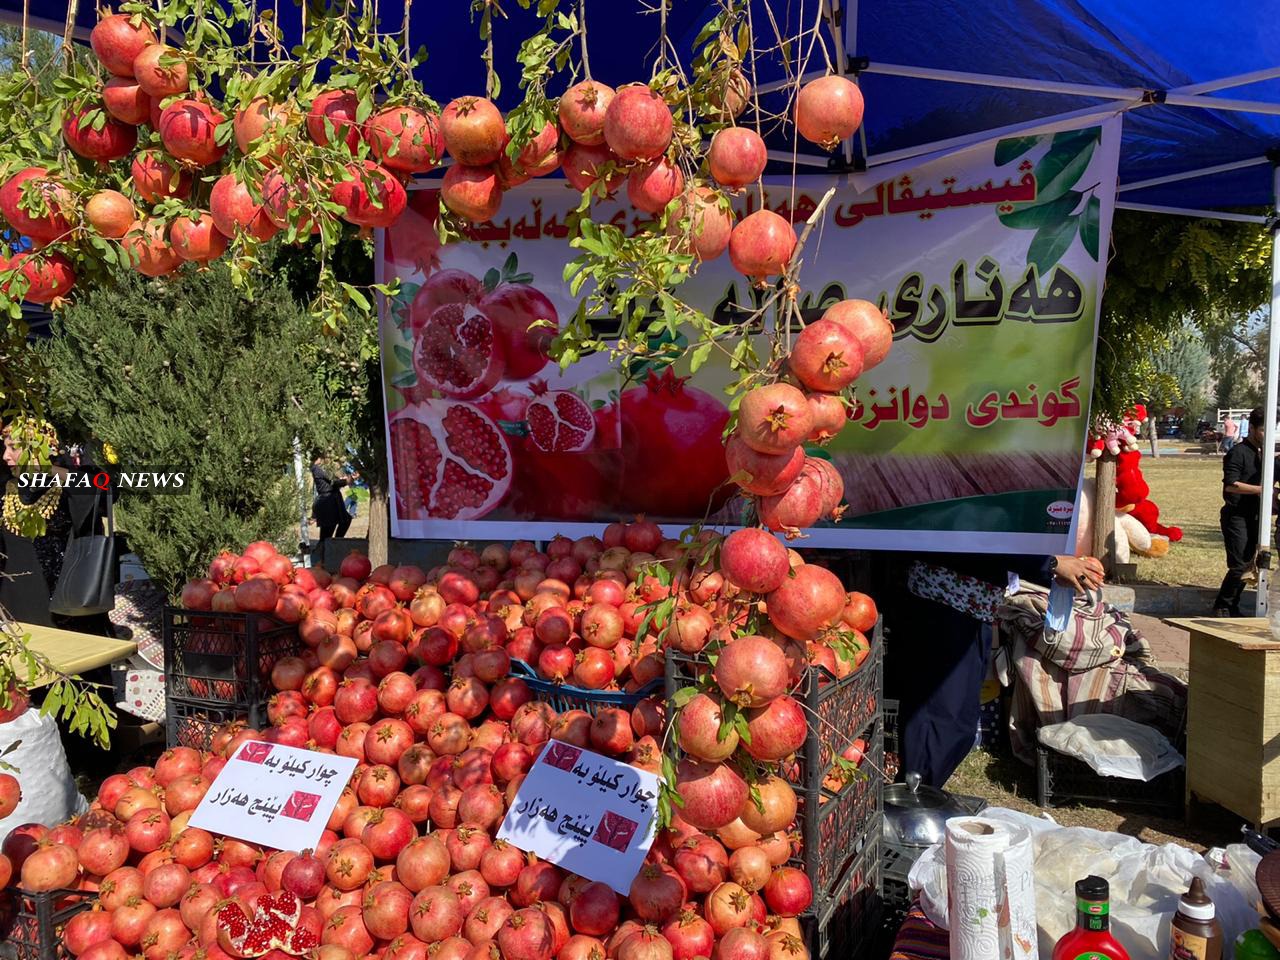 Halabja exports 22 tons of pomegranate to the UK